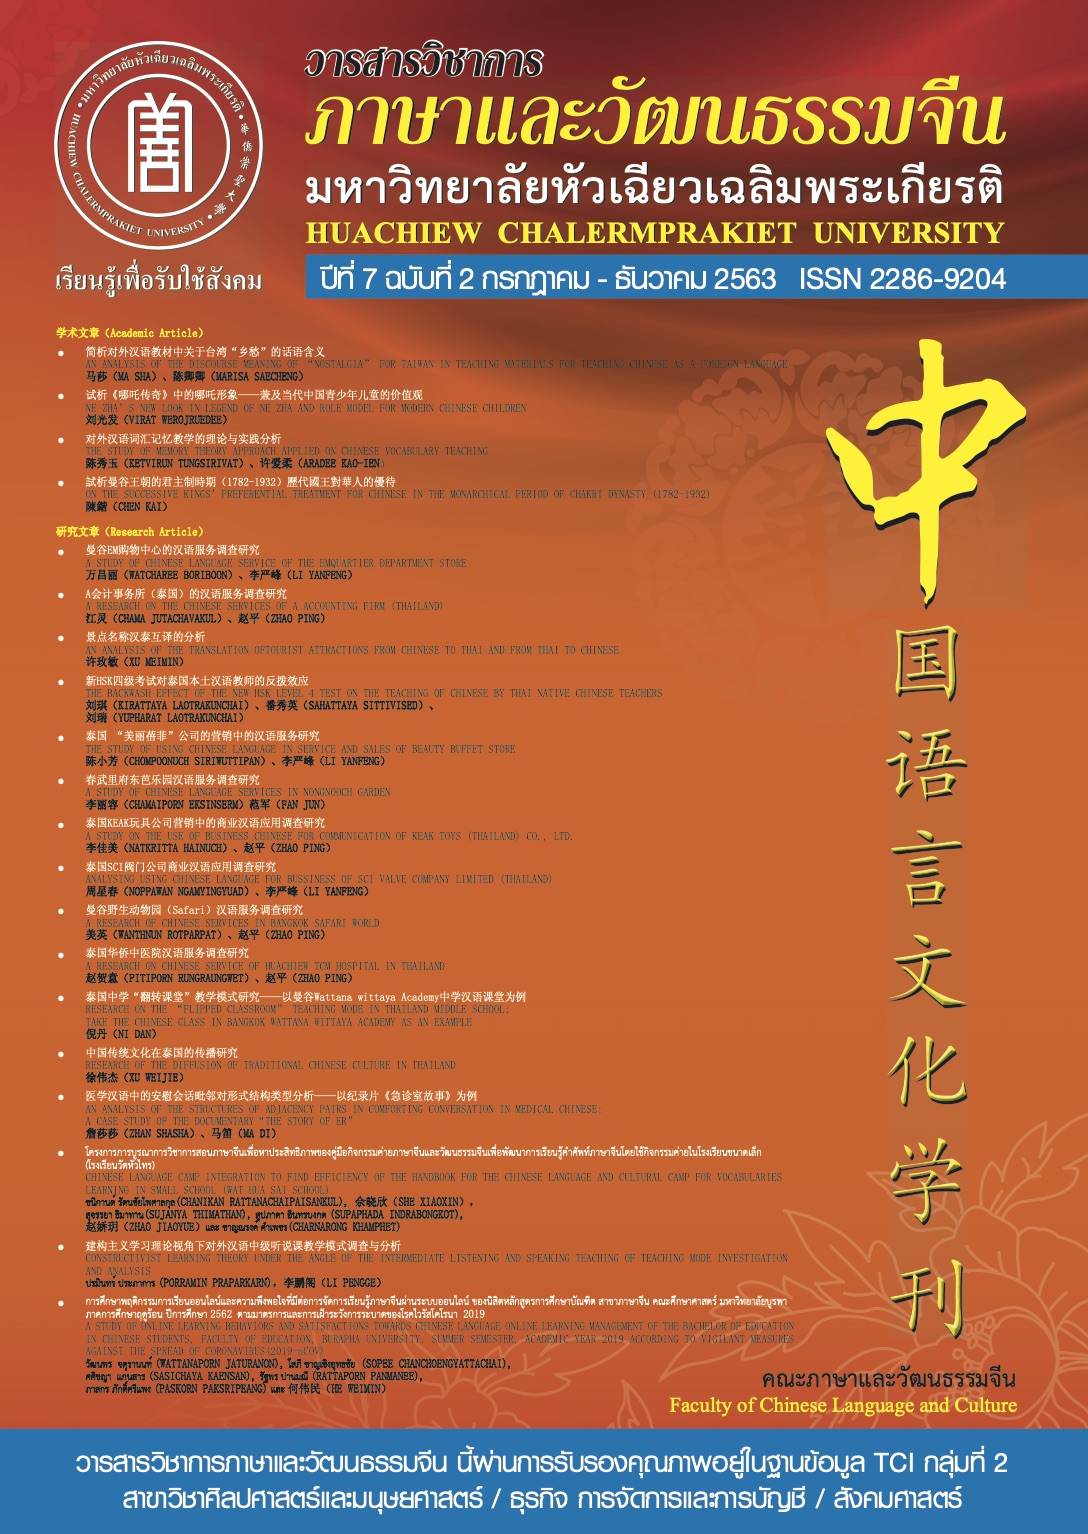 vol-7-no-2-2020-year-7-vol-2-journal-of-faculty-of-chinese